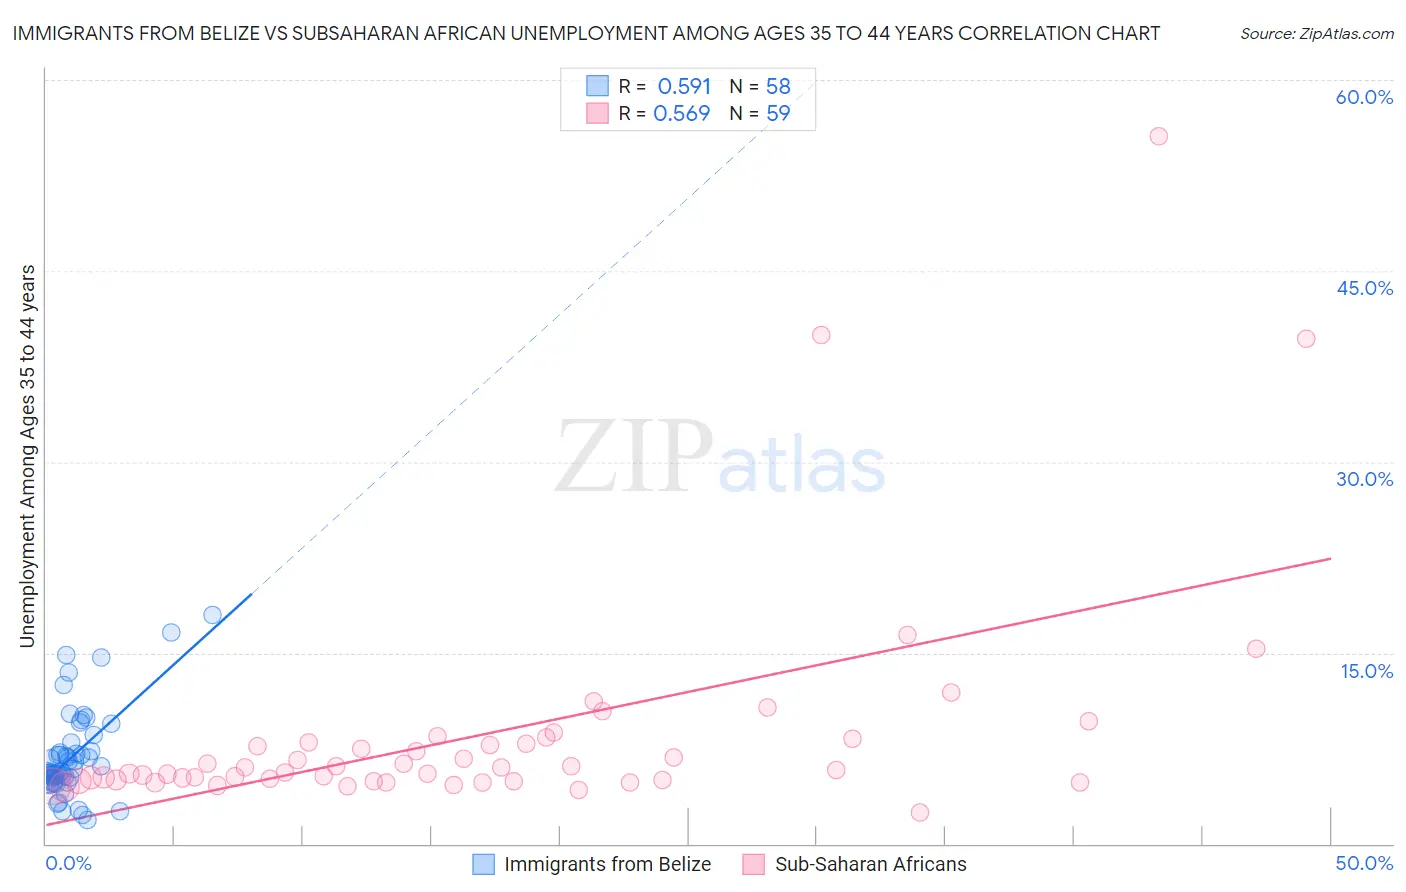 Immigrants from Belize vs Subsaharan African Unemployment Among Ages 35 to 44 years